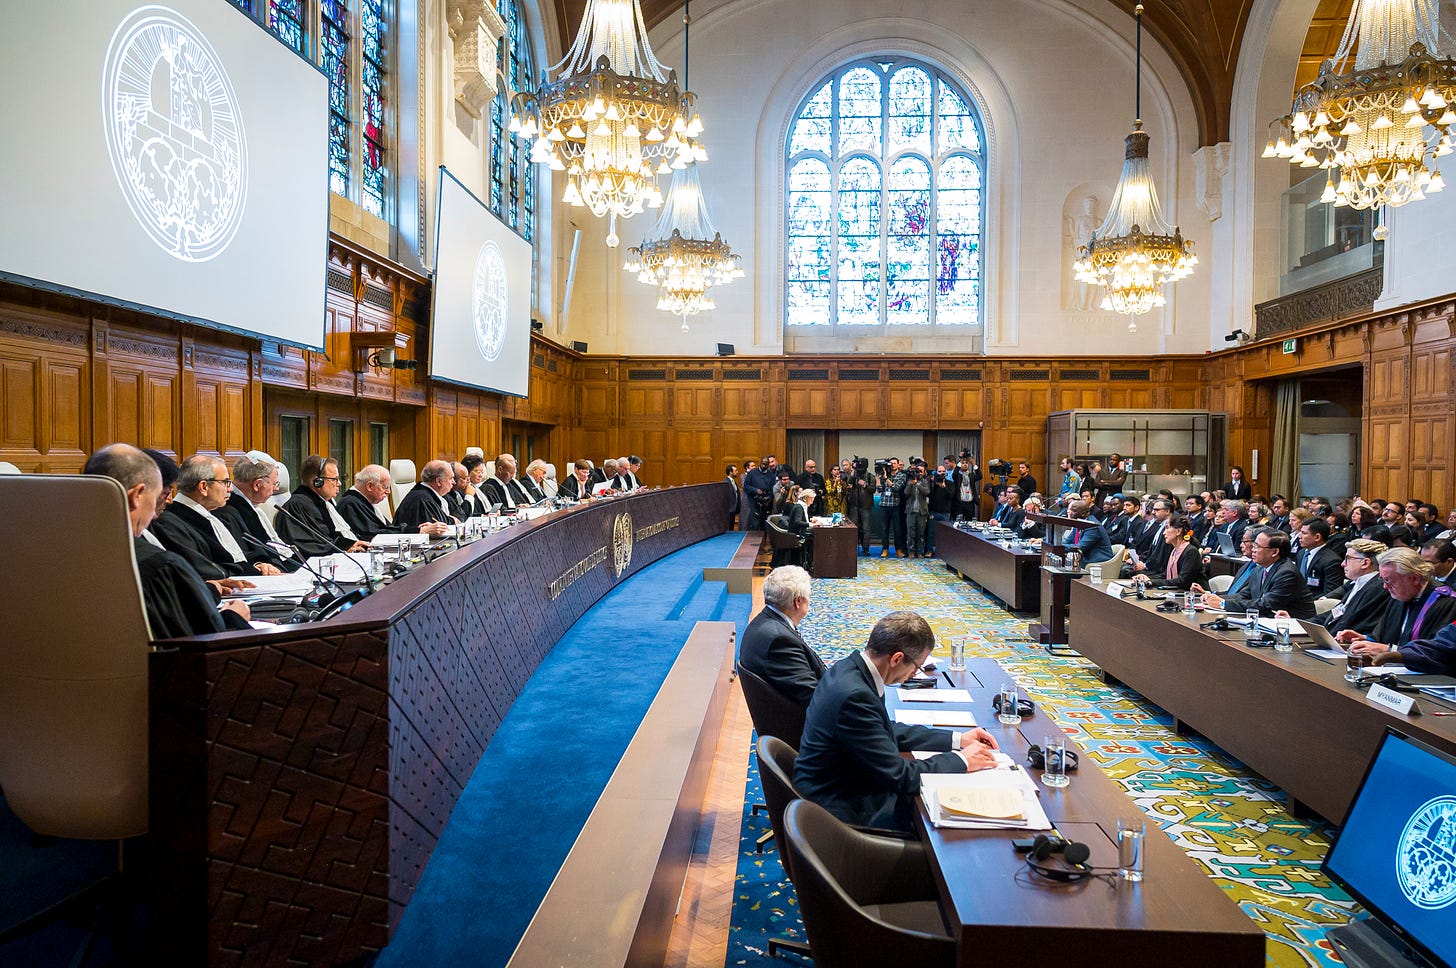 ICJ General Presentation Gallery (ICJ Film, Official Pictures and ...